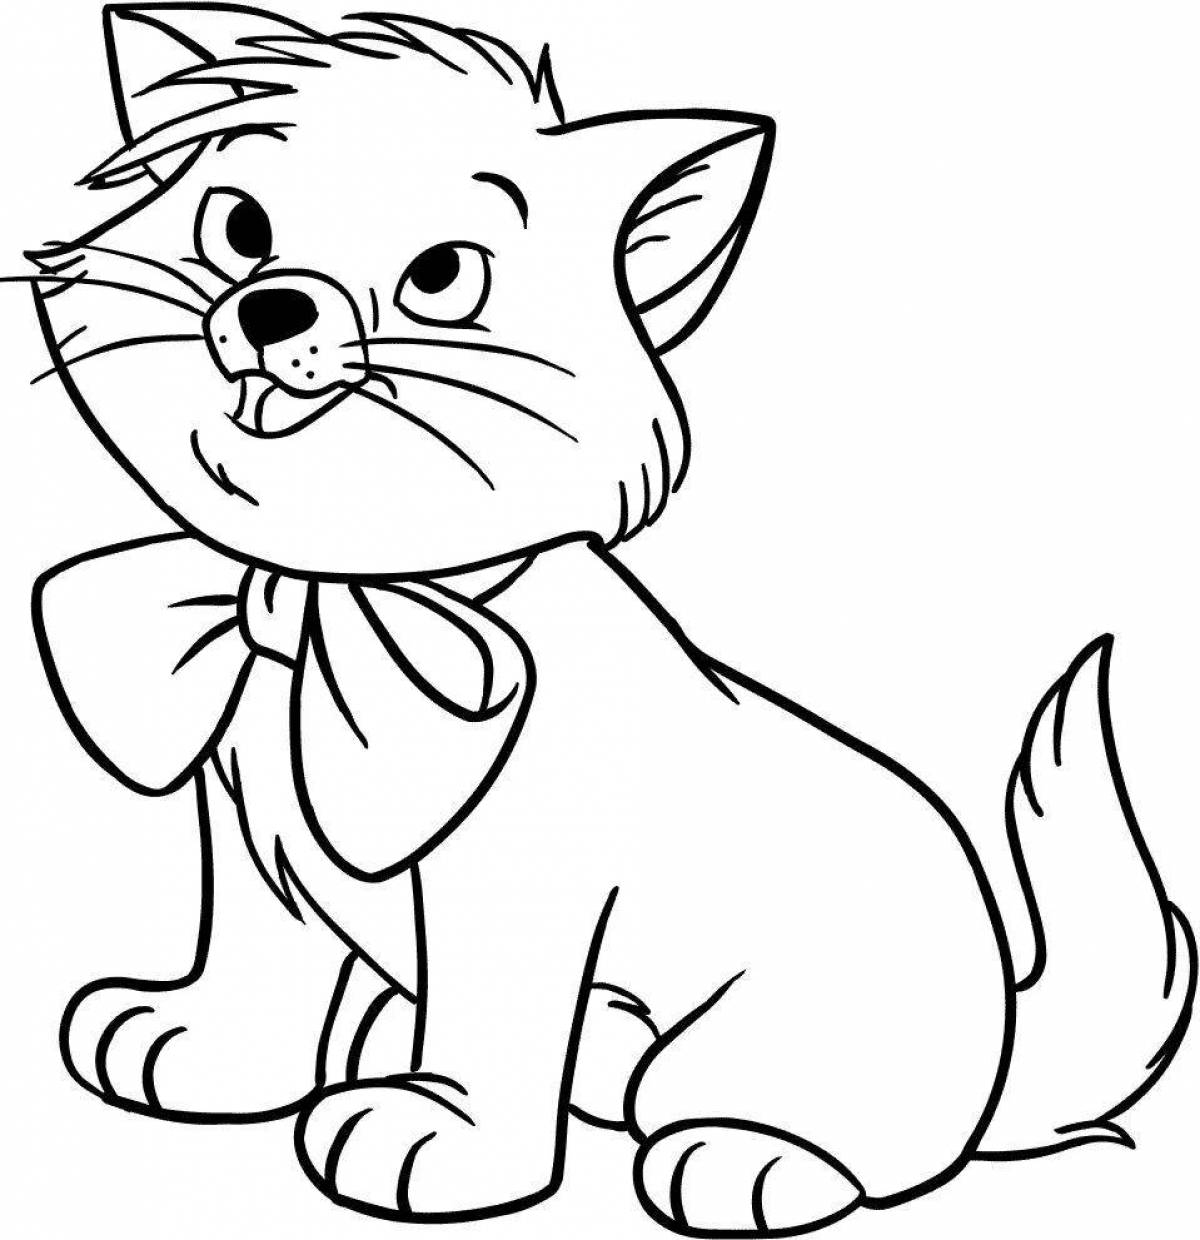 Coloring cat for children 5-6 years old